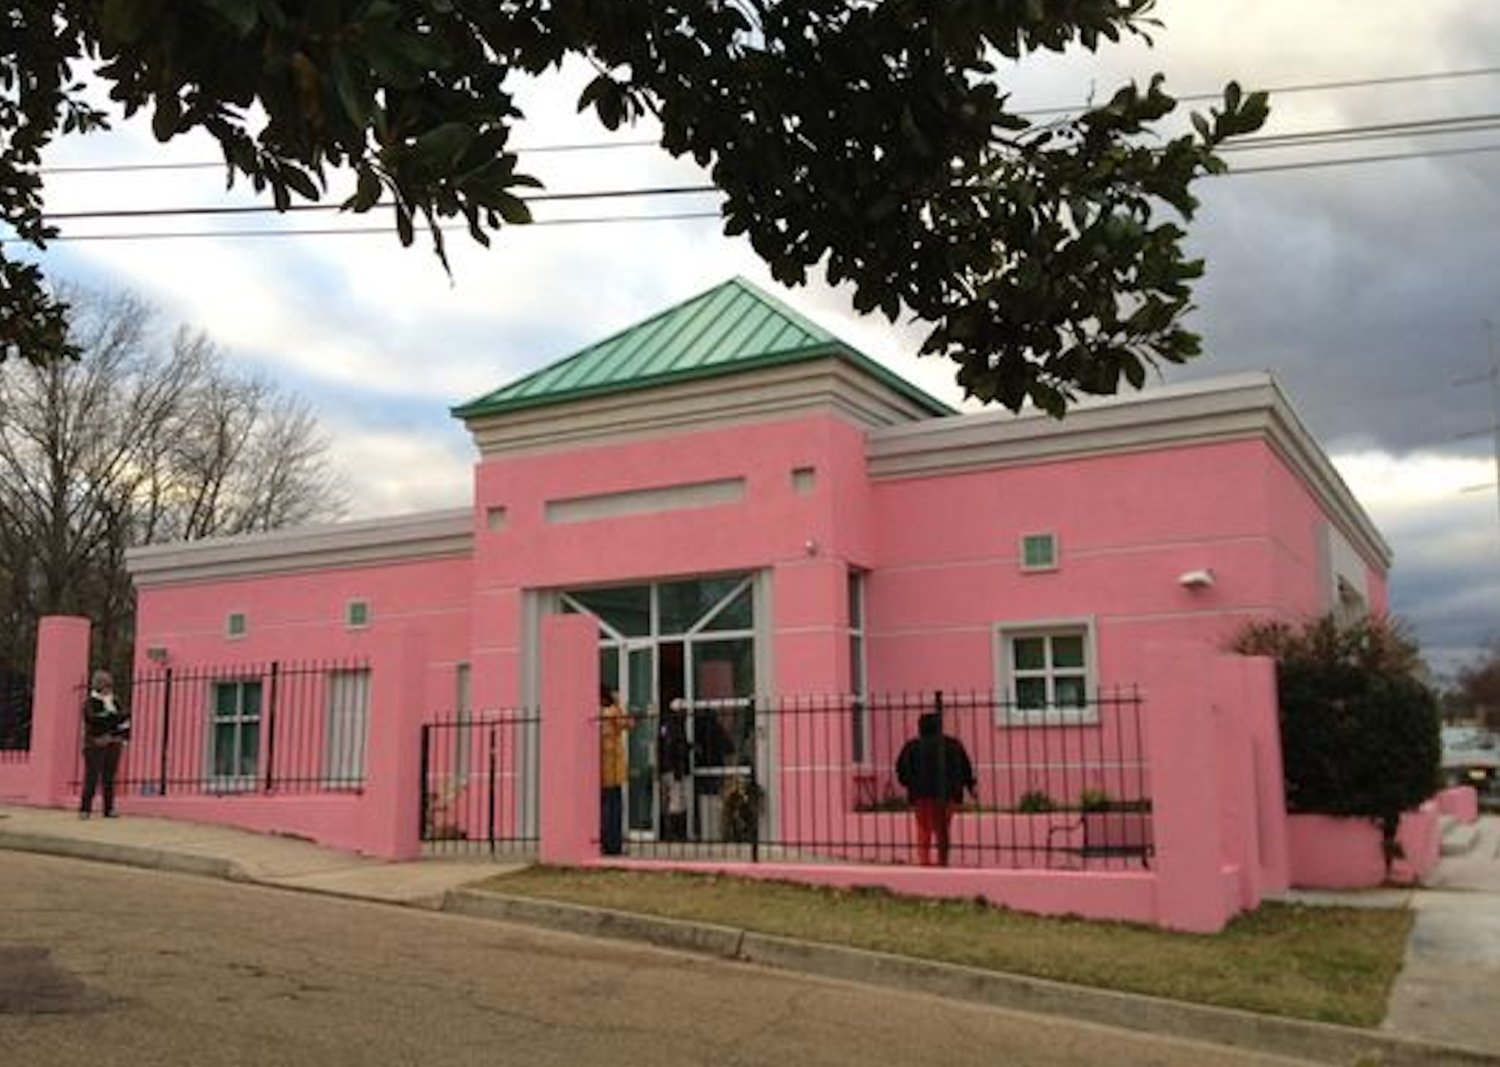 One year after the Mississippi Justice Institute filed a lawsuit against the city of Jackson, the city council has repealed their buffer zone ordinance that restricted free speech around abortion clinics.